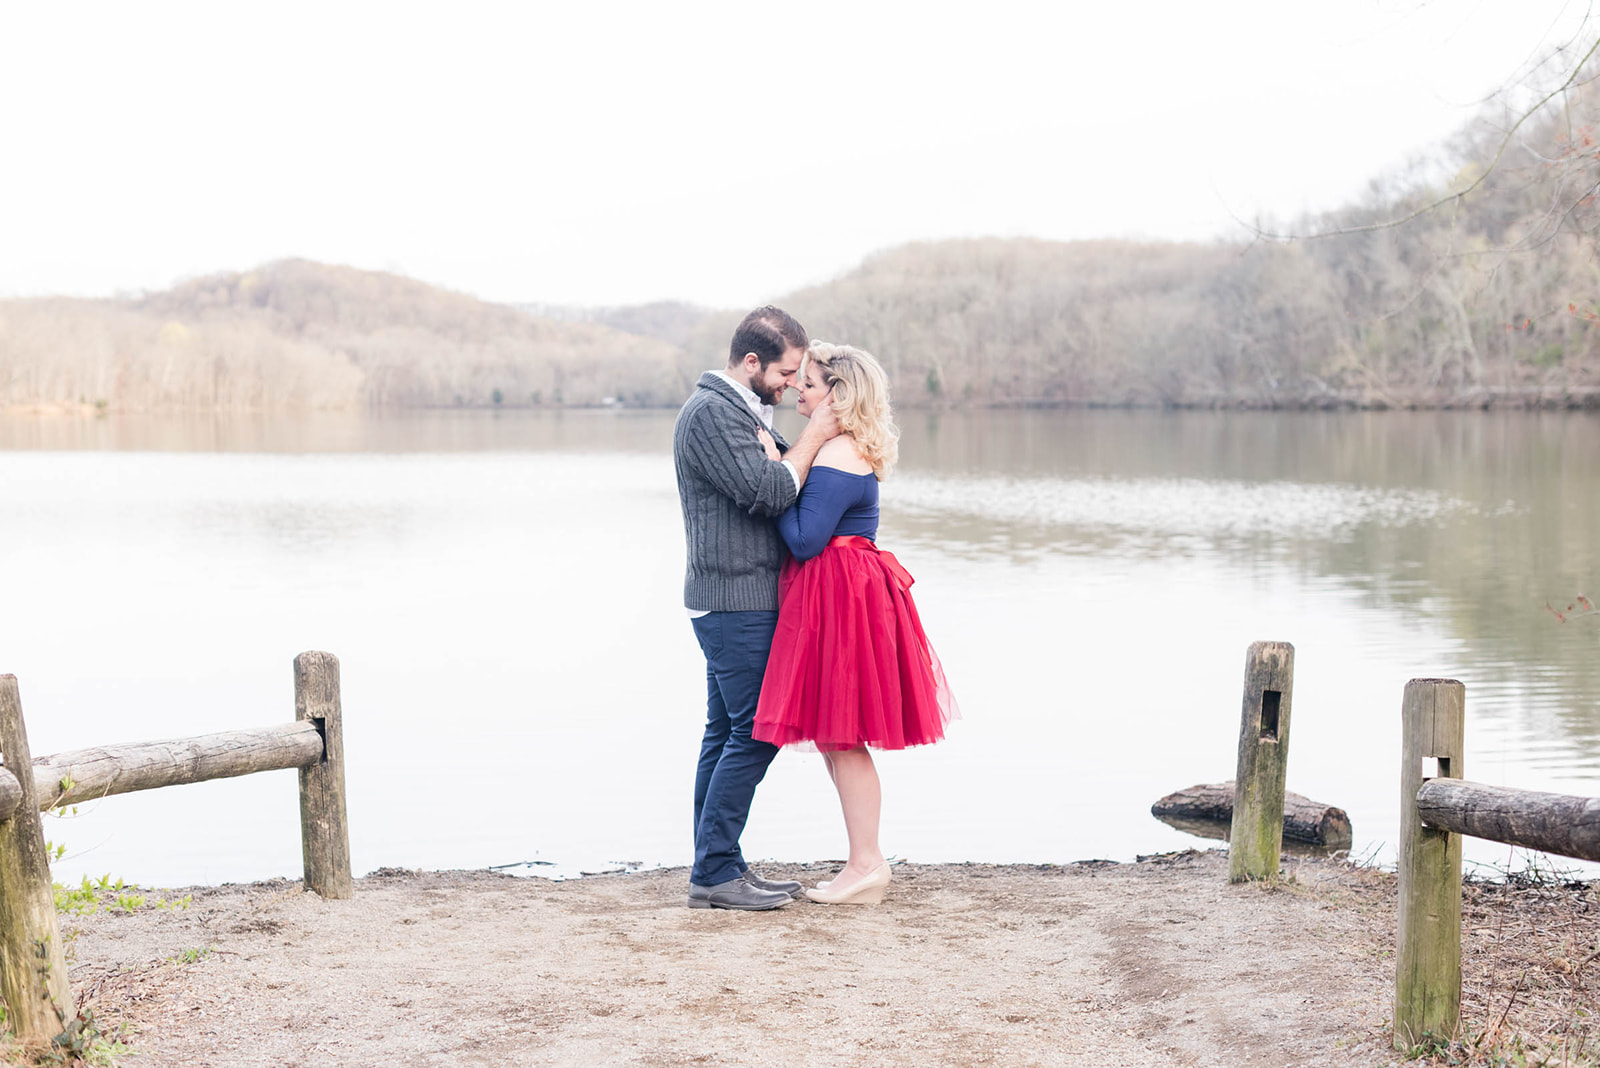 Spring Engagement At Radnor Lake: Gabbee and Rhen Sweet Williams Photography, Nashville, Tennessee